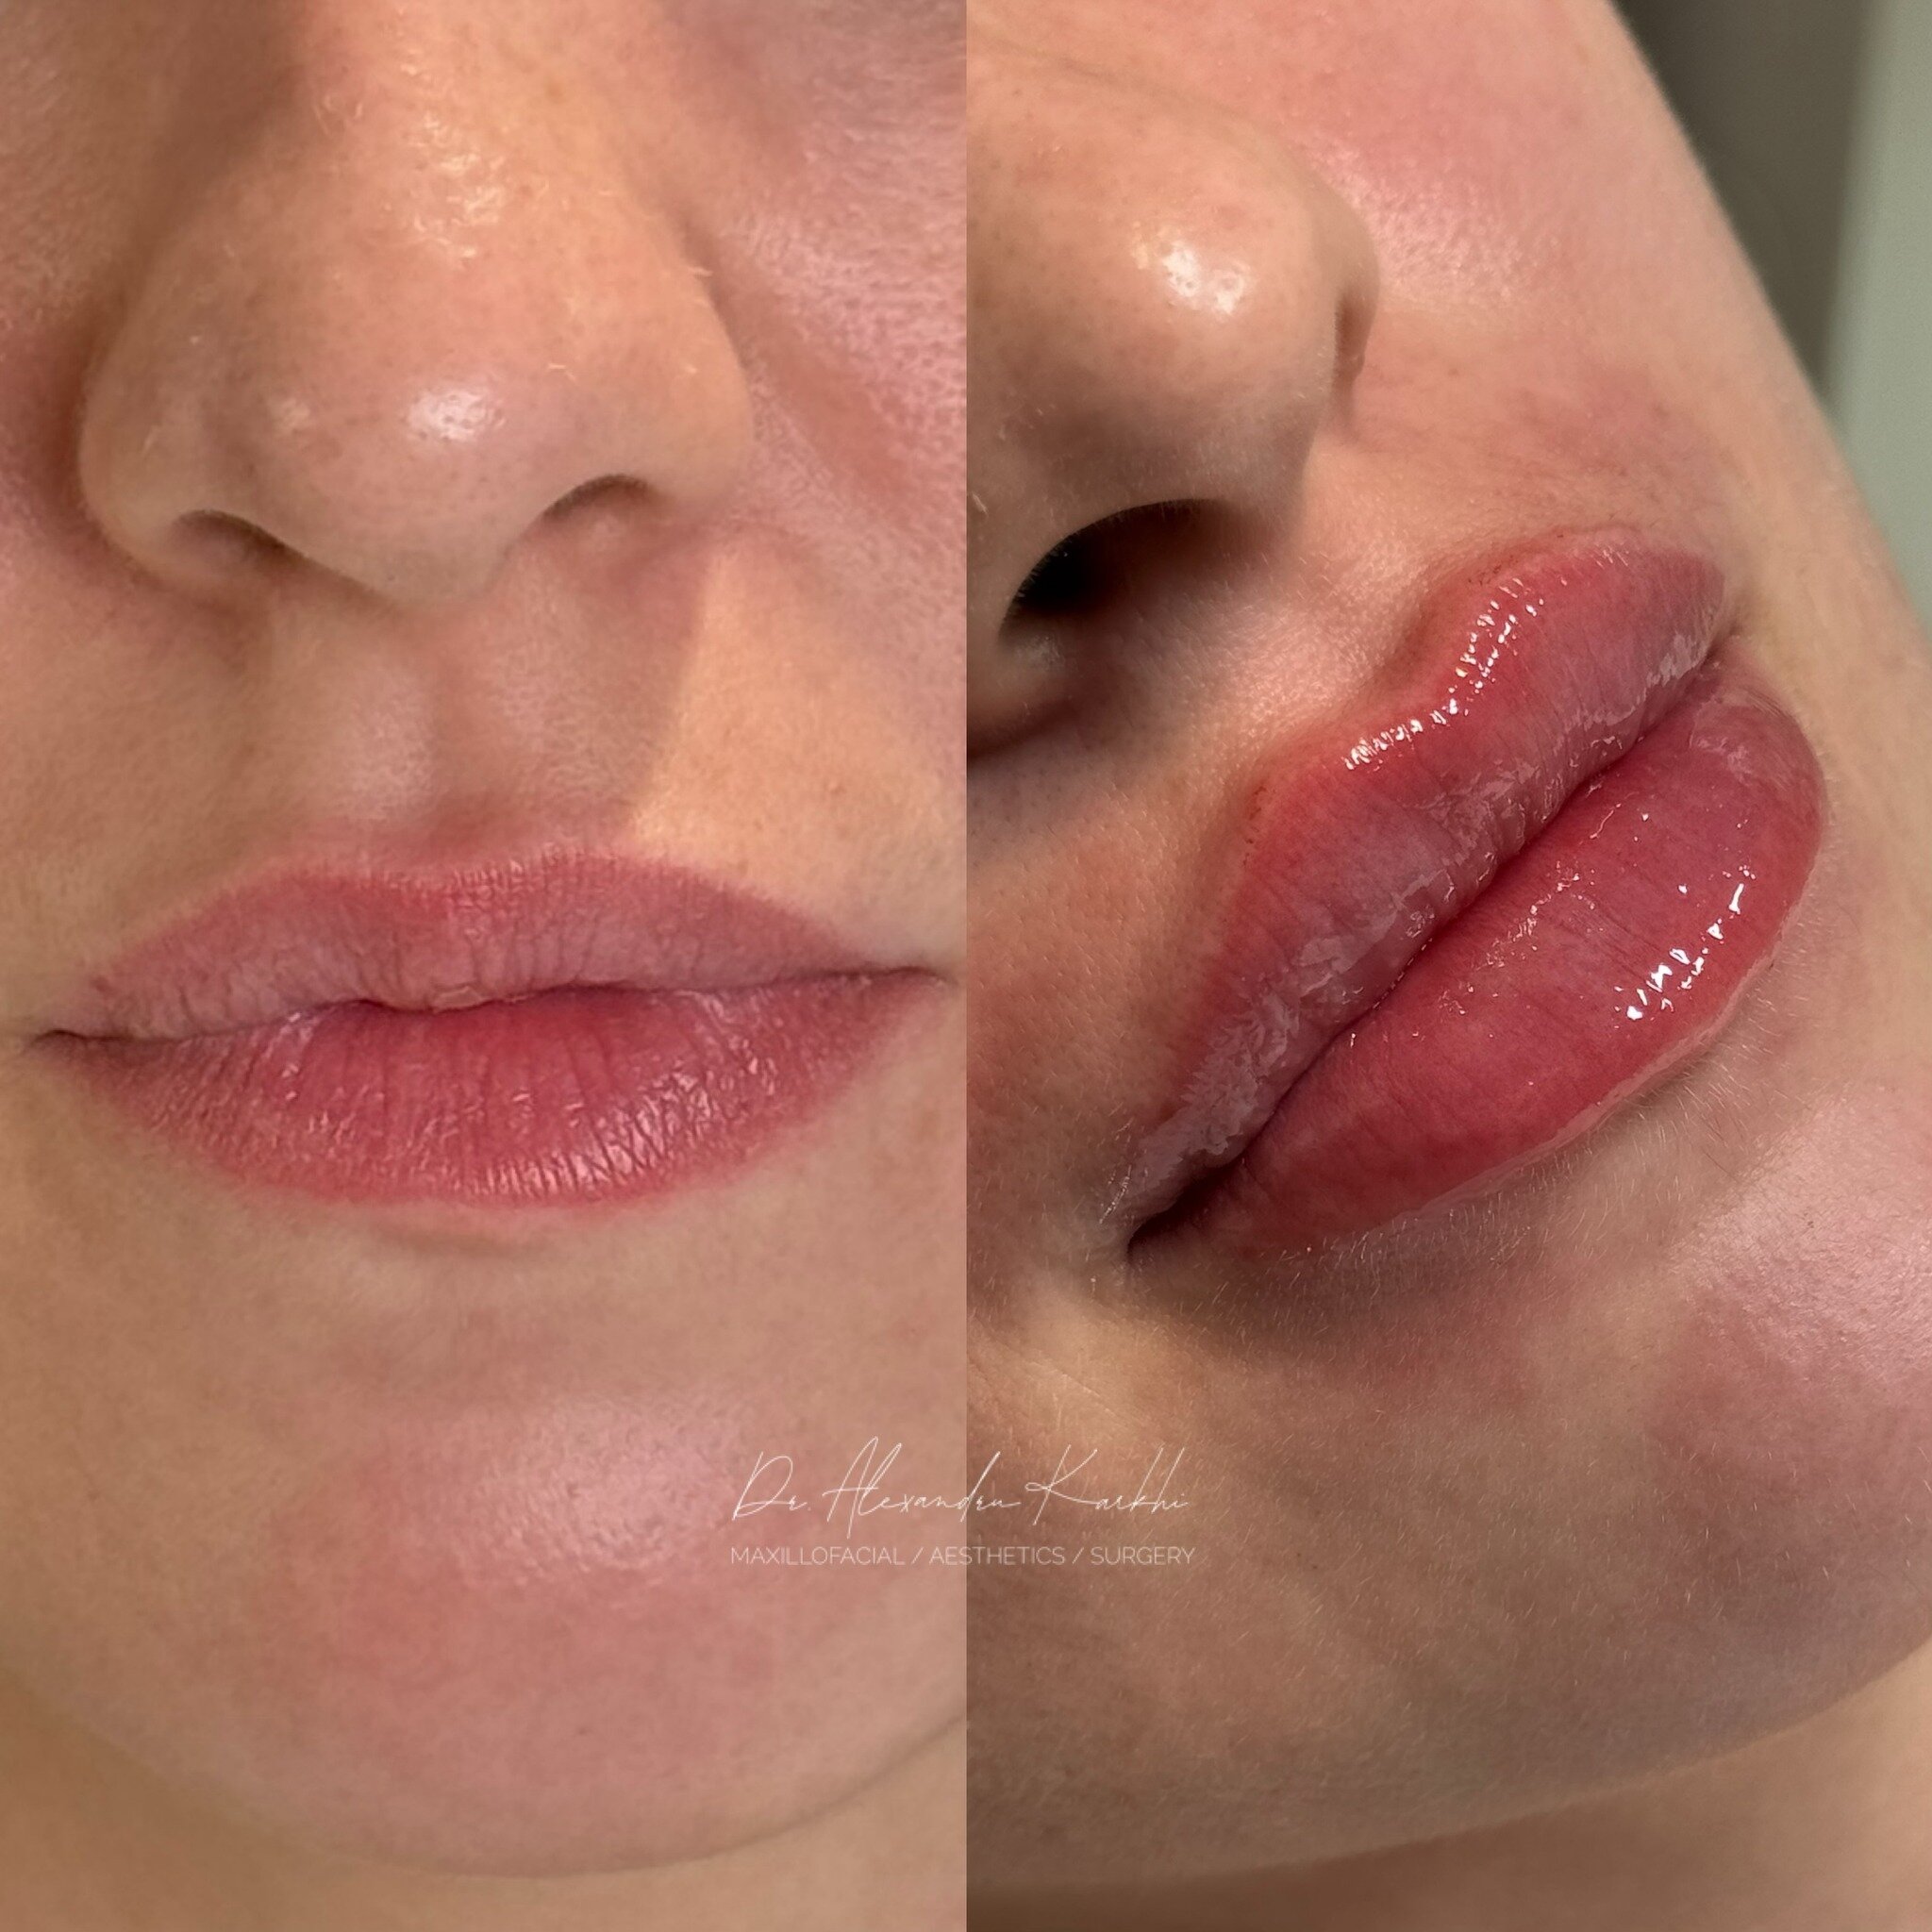 DR.K Lips 💉👄

Exclusively available at CLINICA DR.K Medical Centers ⚜️

😷 Treatment: Non-surgical Lips enhancement
🎯 Purpose: to project and to create the right proportions of the upper and lower Lips
👓 How it works: Non-Surgical augmentation us